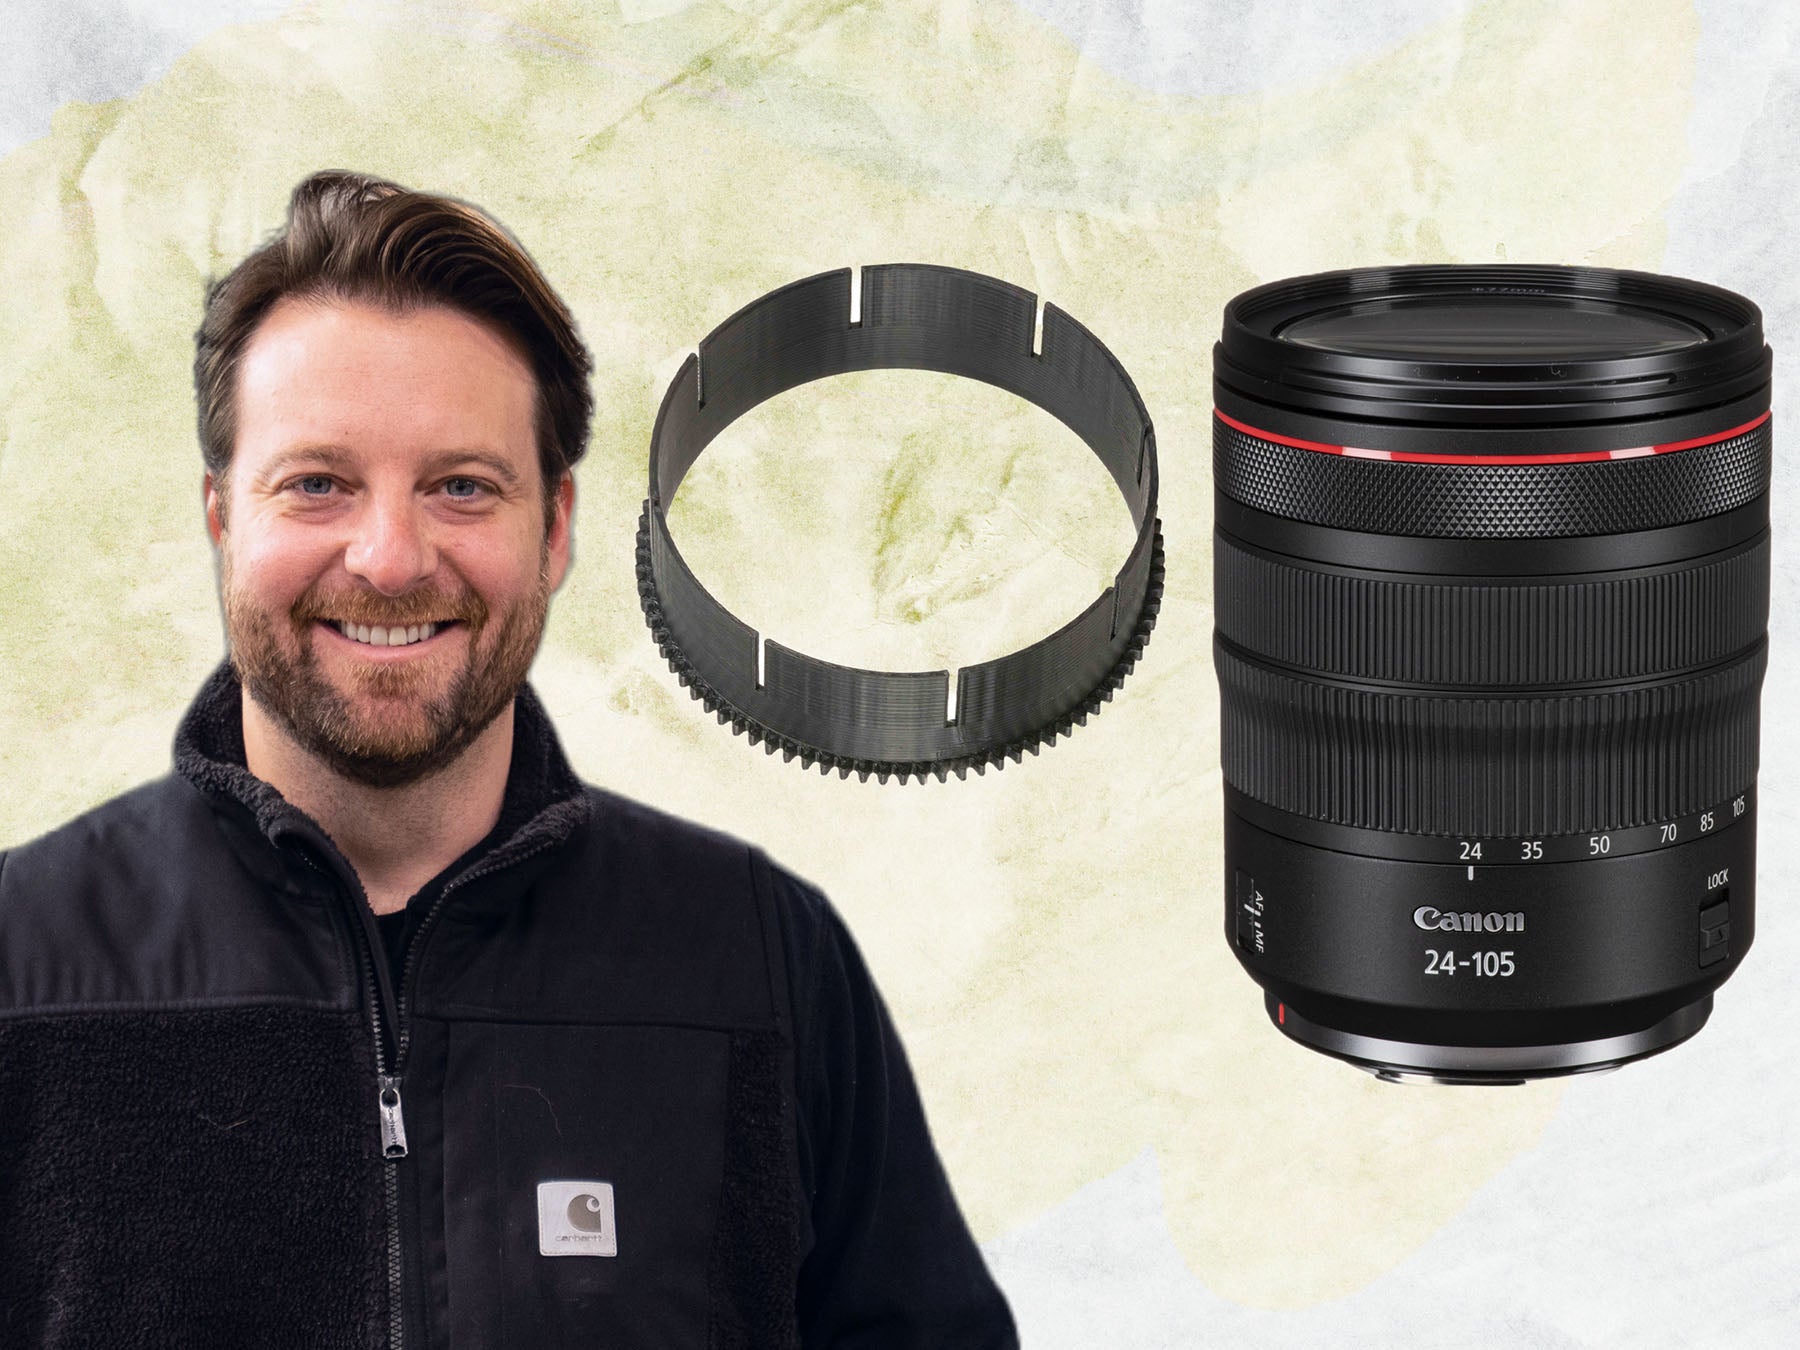 Canon RF 24-105mm f/4L Lens and Zoom Gear Installation // Ikelite 200DL Underwater Housing